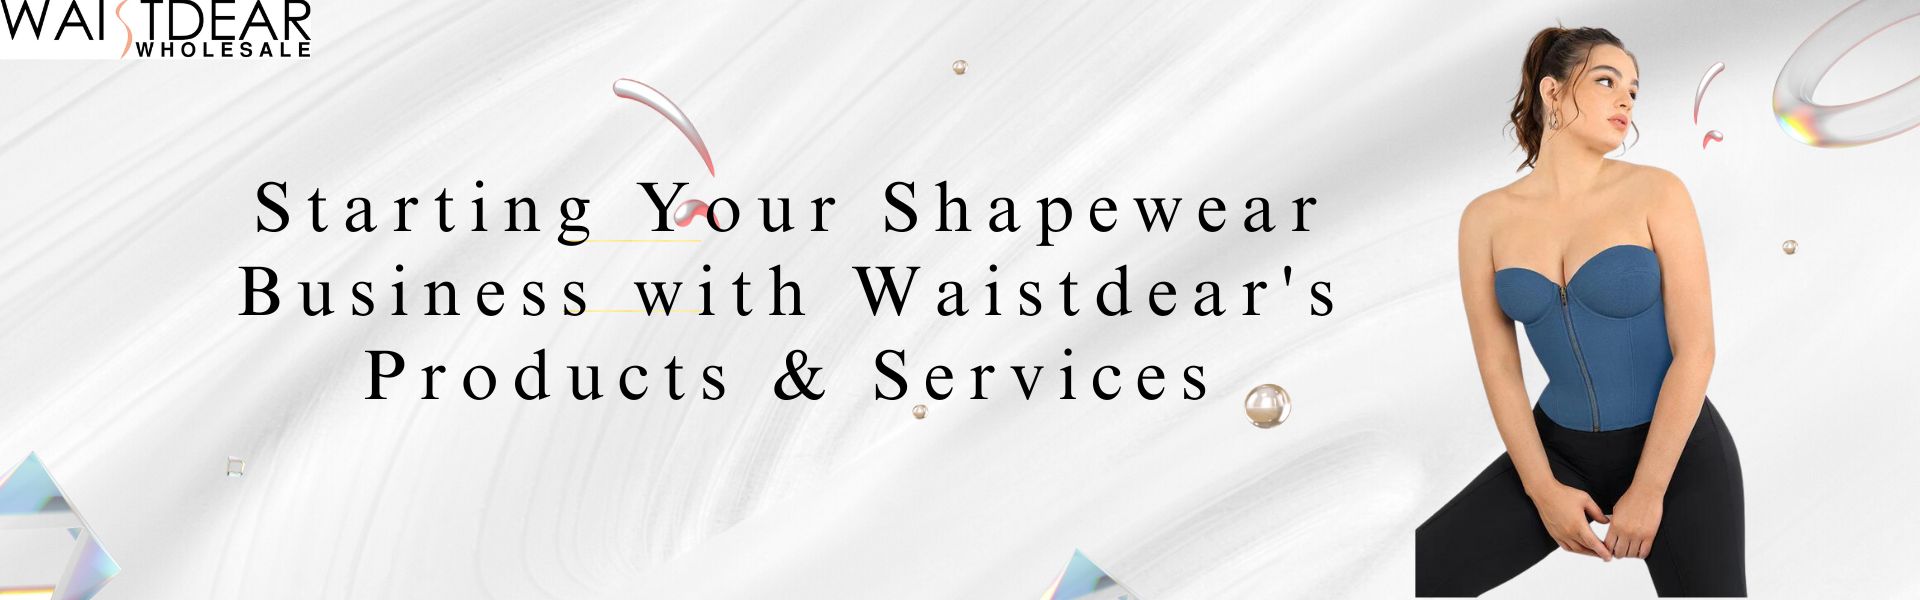 Starting Your Shapewear Business with Waistdear's Products & Services